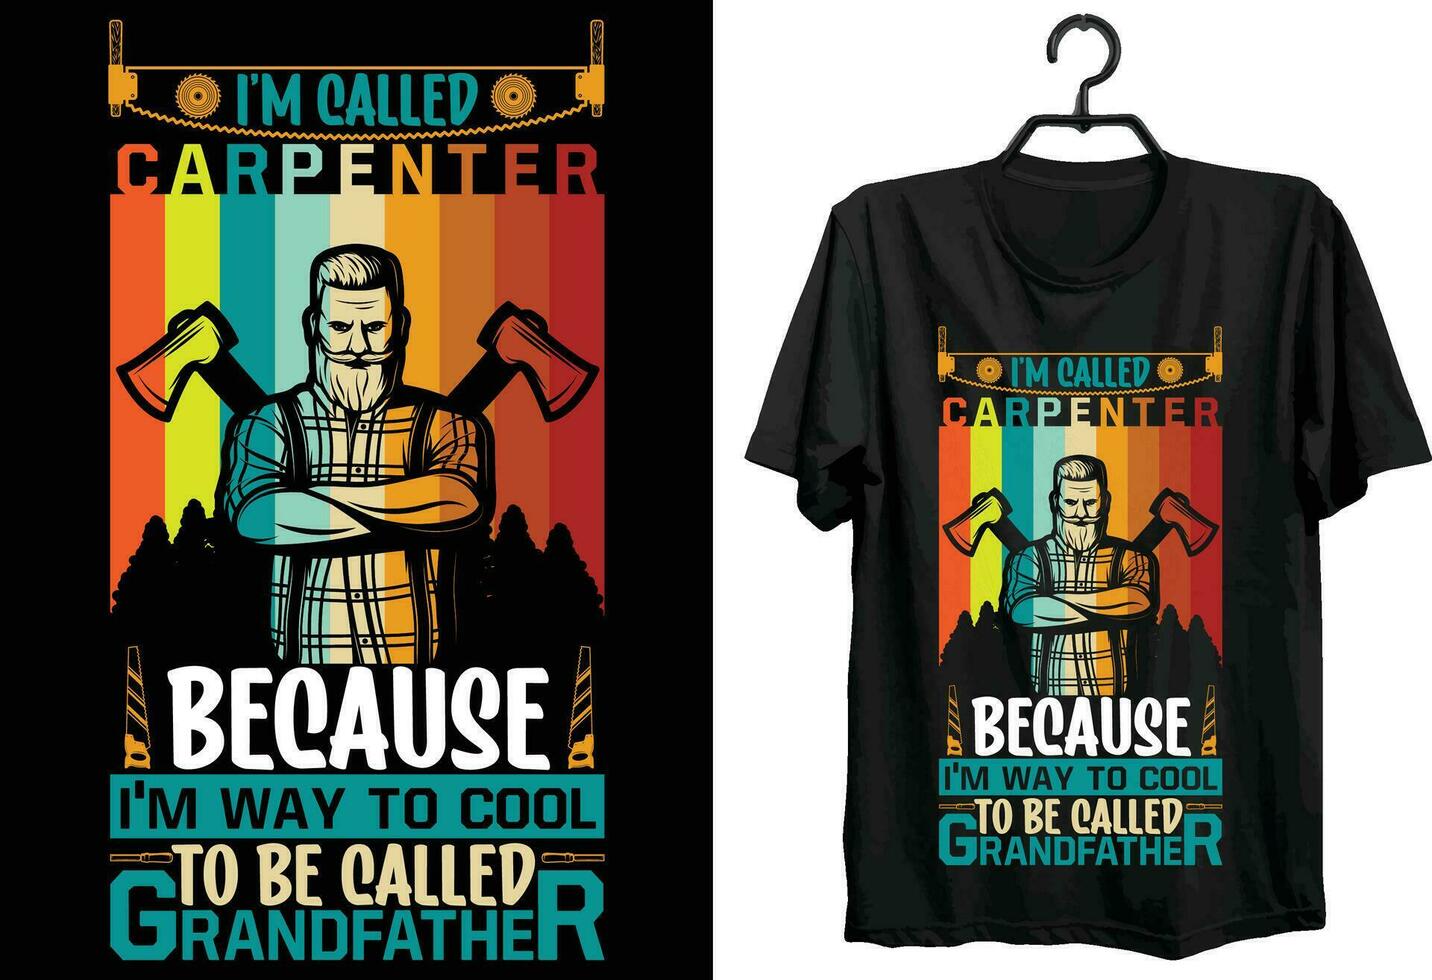 I'm Called Carpenter Because I'm Way To Cool To Be Called Grandfather. Carpenter T-shirt Design. Funny Gift Item Carpenter T-shirt Design For Wood Workers. vector